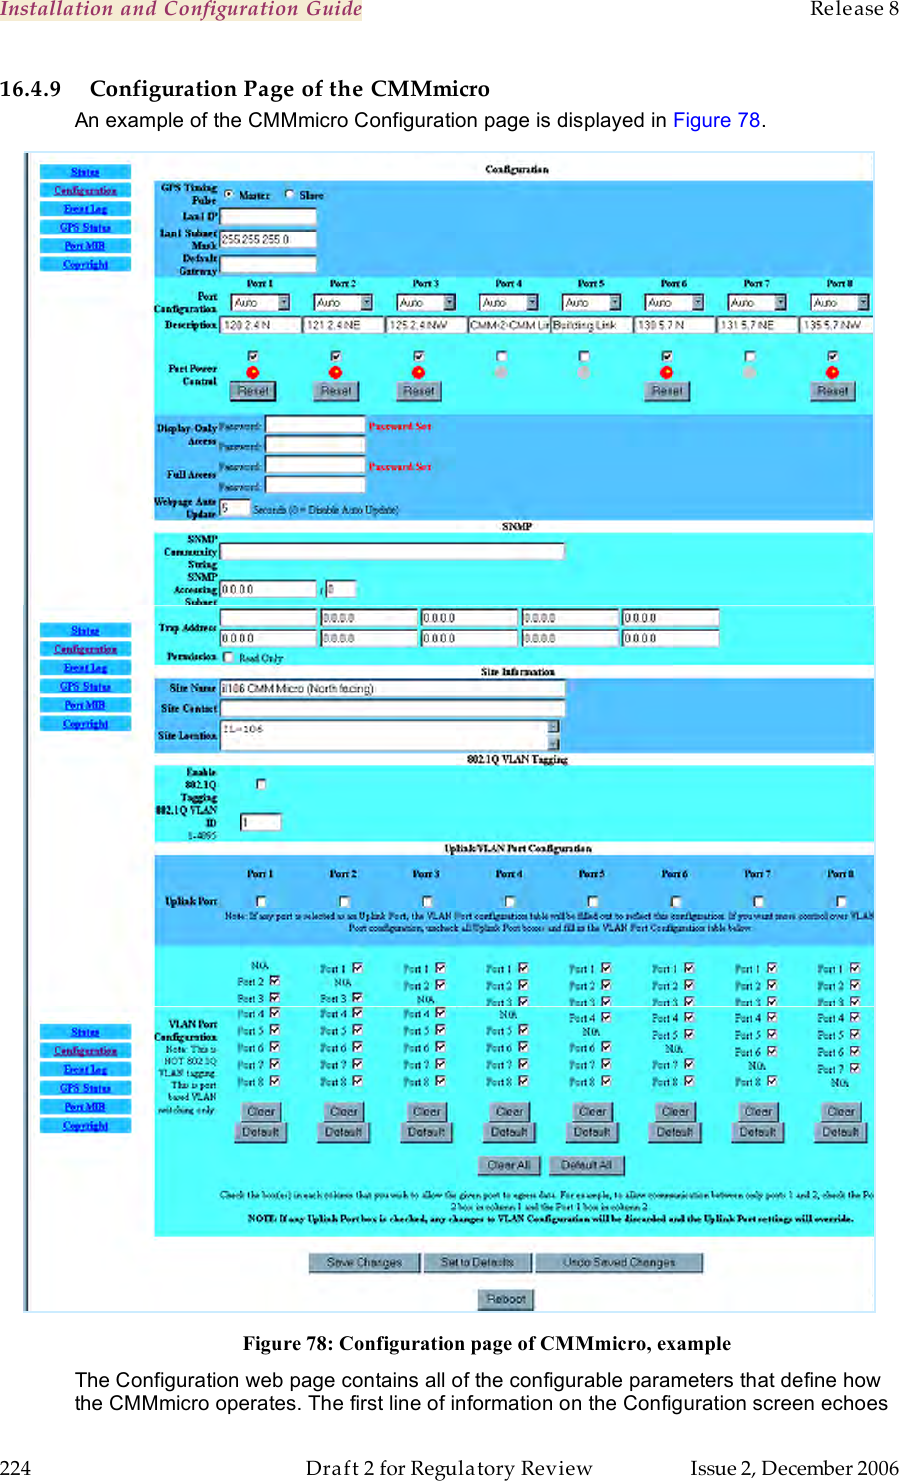 Installation and Configuration Guide    Release 8   224  Draft 2 for Regulatory Review  Issue 2, December 2006 16.4.9 Configuration Page of the CMMmicro An example of the CMMmicro Configuration page is displayed in Figure 78.       Figure 78: Configuration page of CMMmicro, example The Configuration web page contains all of the configurable parameters that define how the CMMmicro operates. The first line of information on the Configuration screen echoes 